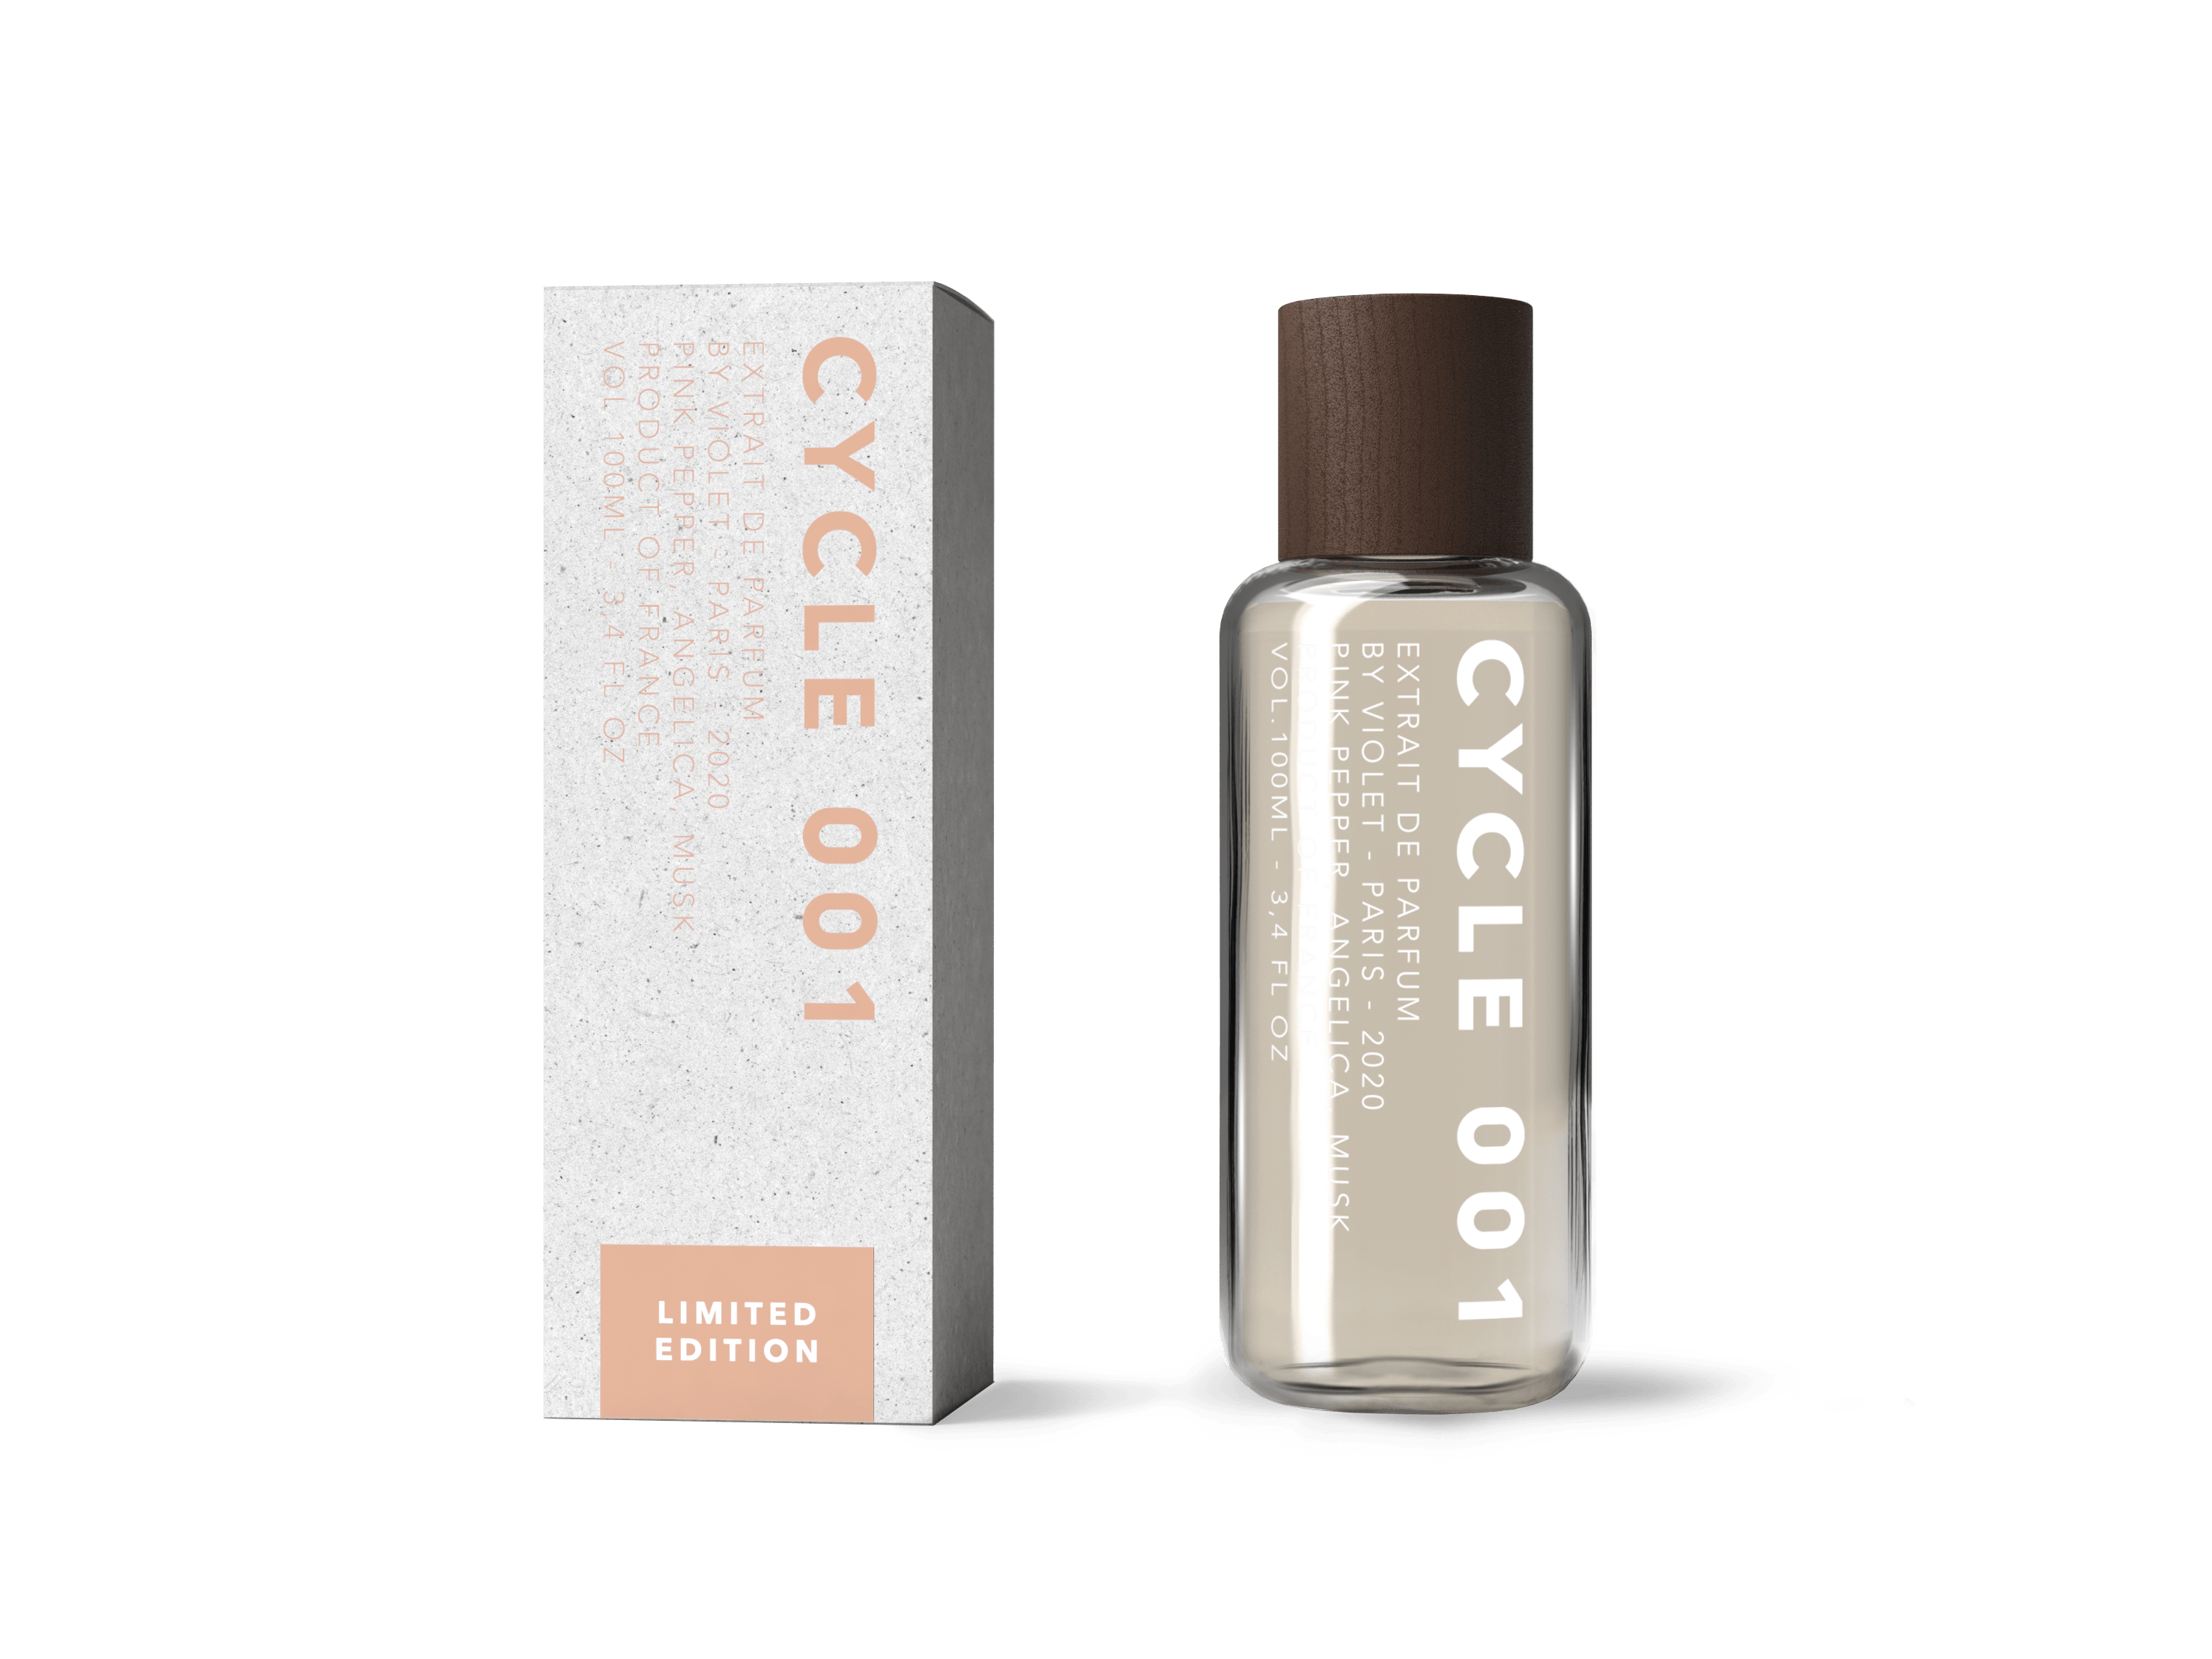 Maison Violet - Cycle 001 refill | Perfume Lounge